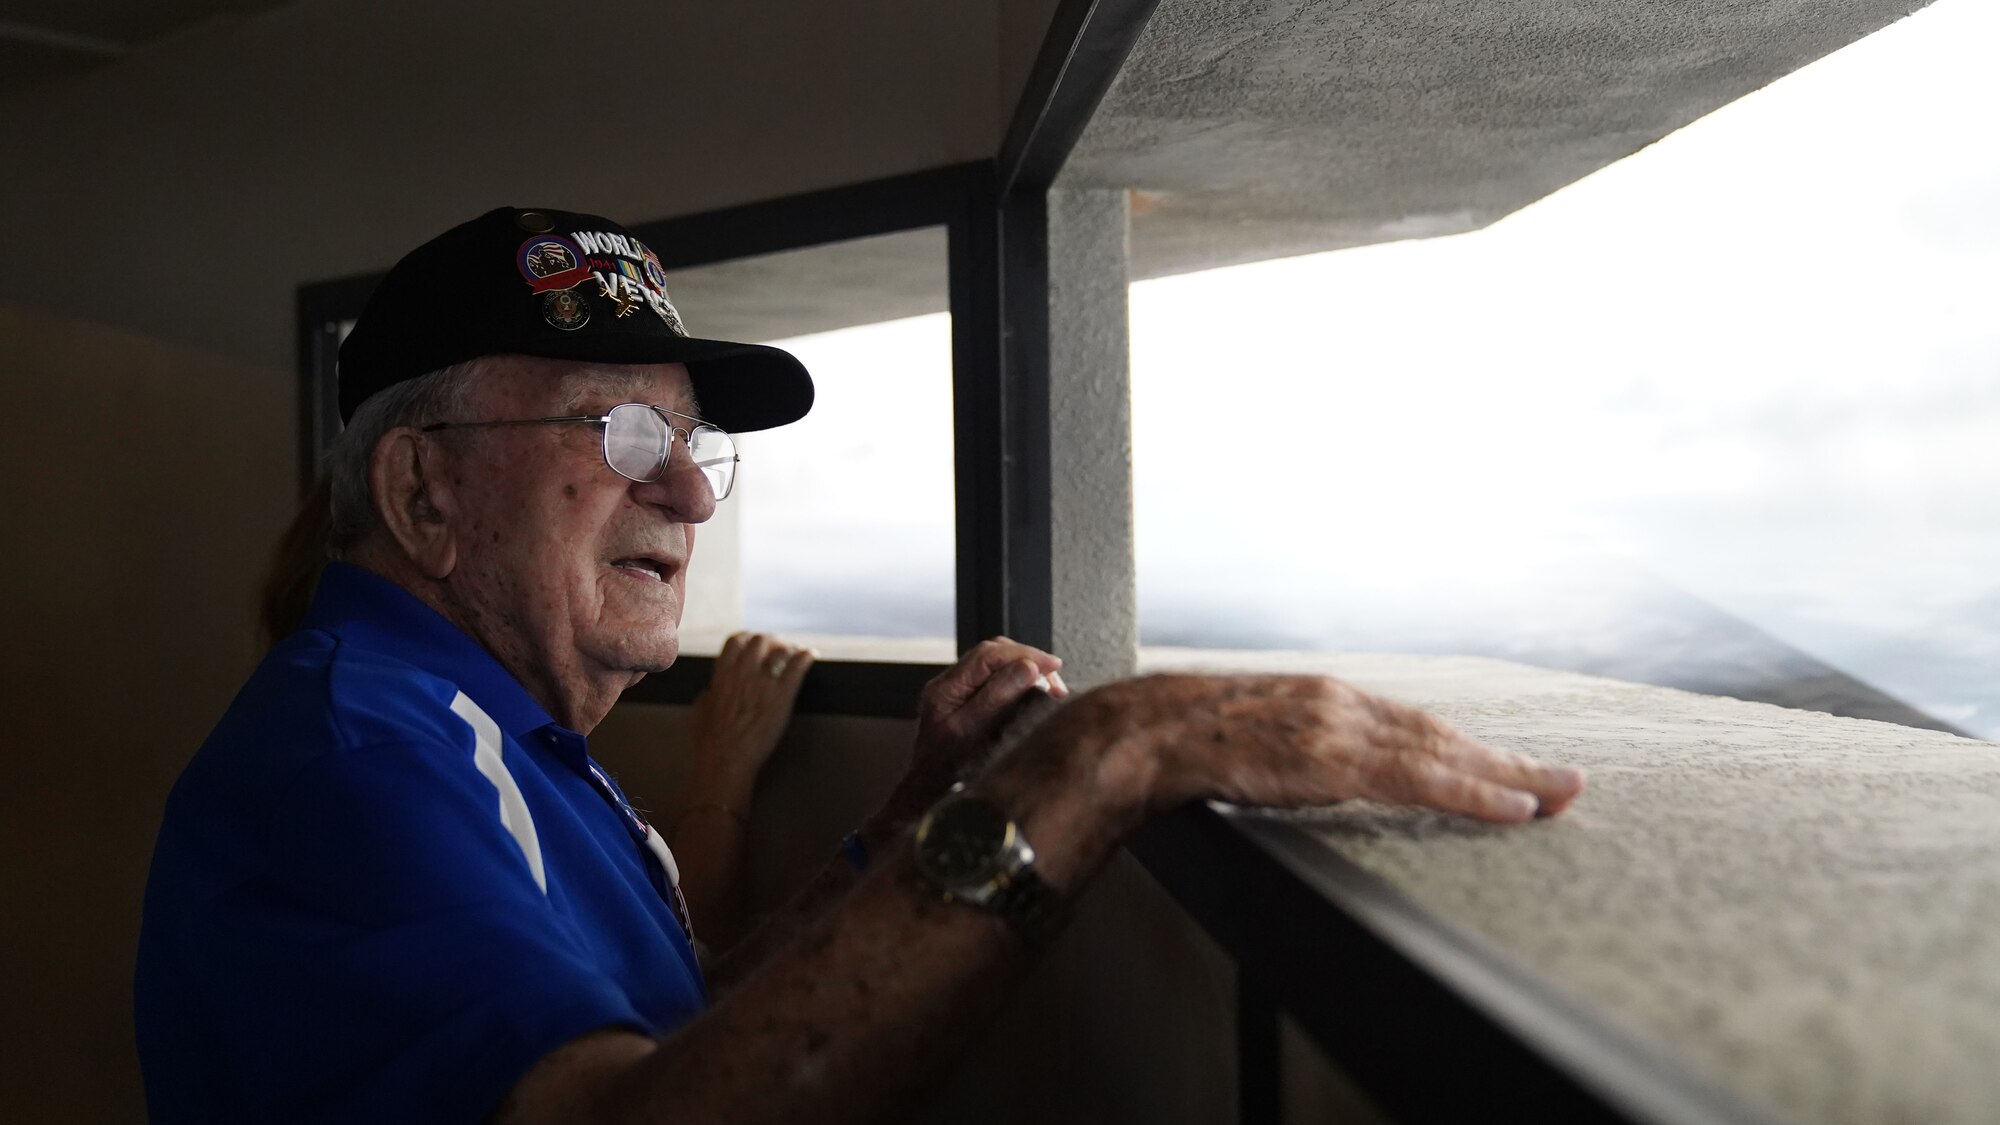 Retired U.S. Army Air Forces Chief Master Sgt. Mel Jenner, 452nd Bomber Group radio operator, stands in a replica of a D-Day bunker at the National World War II Museum, New Orleans, Louisiana, Sept. 14, 2022. Jenner flew over Normandy Beach on D-Day, June 6, 1944. He began his 26 year military career by training as a radio operator at what was then known as Keesler Army Airfield. (U.S. Air Force photo by Airman 1st Class Elizabeth Davis)